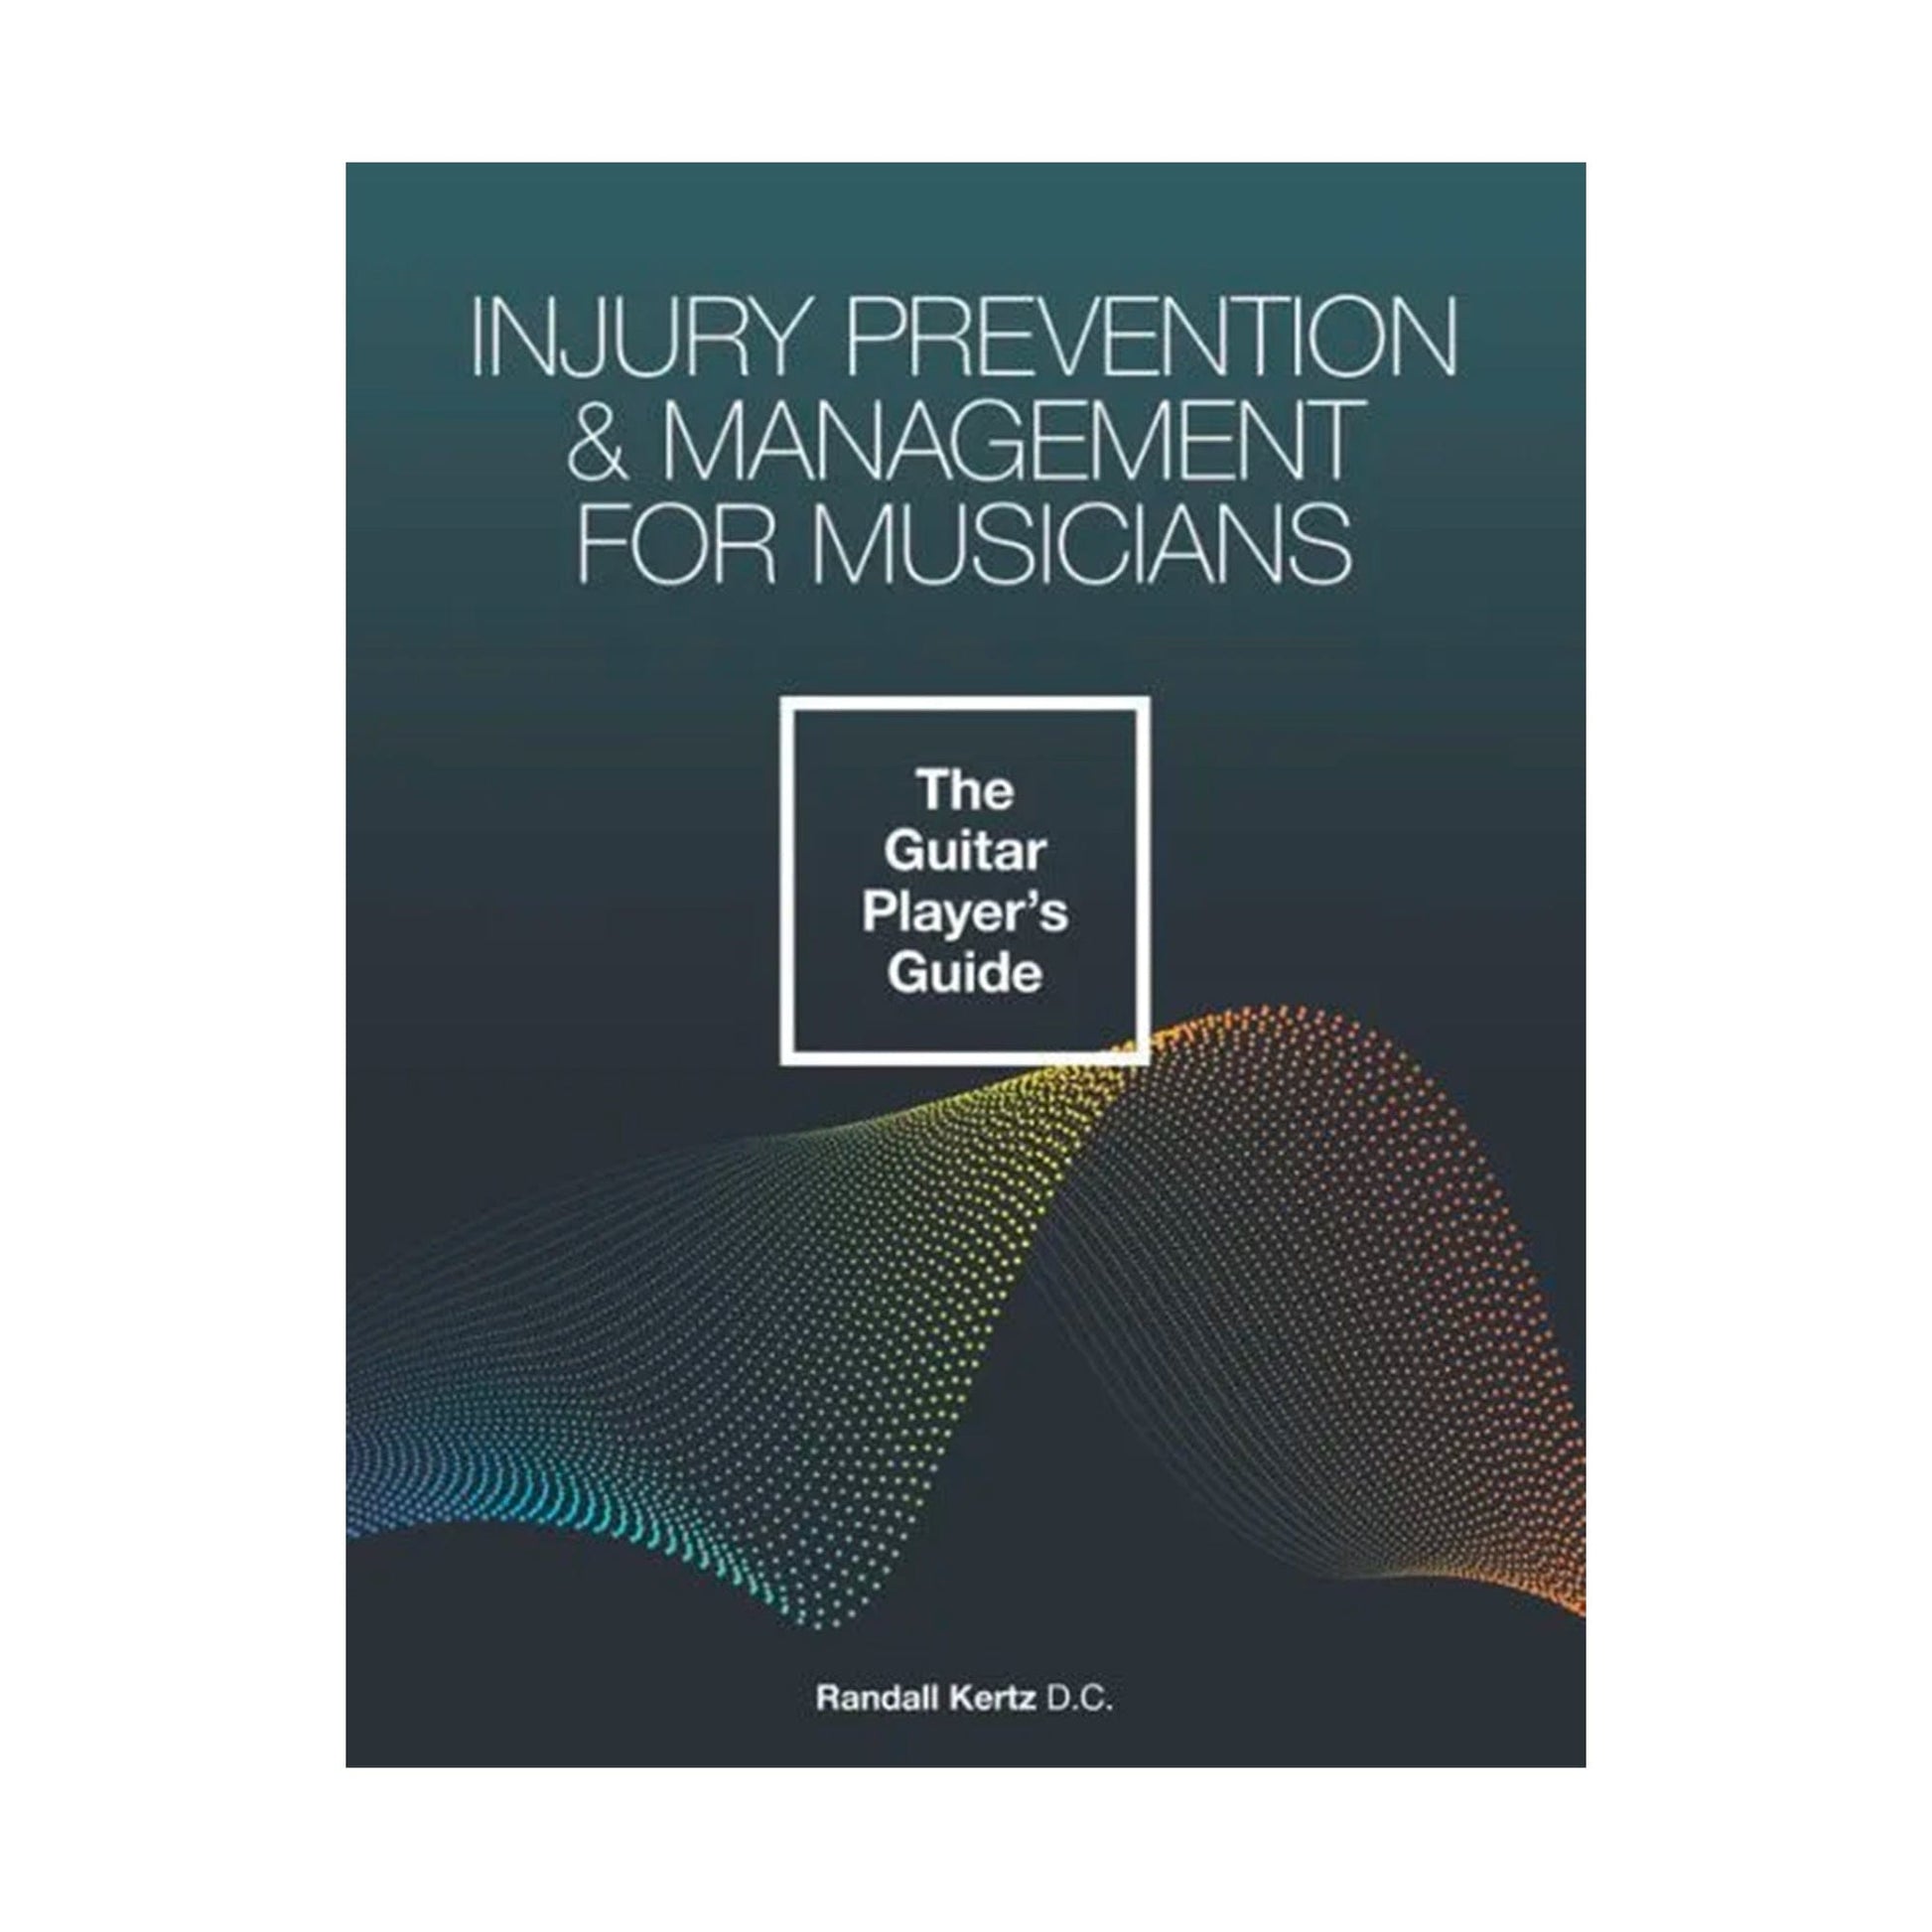 Injury Prevention & Management For Musicians - The Guitar Player's Guide by Randall Kertz Accessories / Books and DVDs